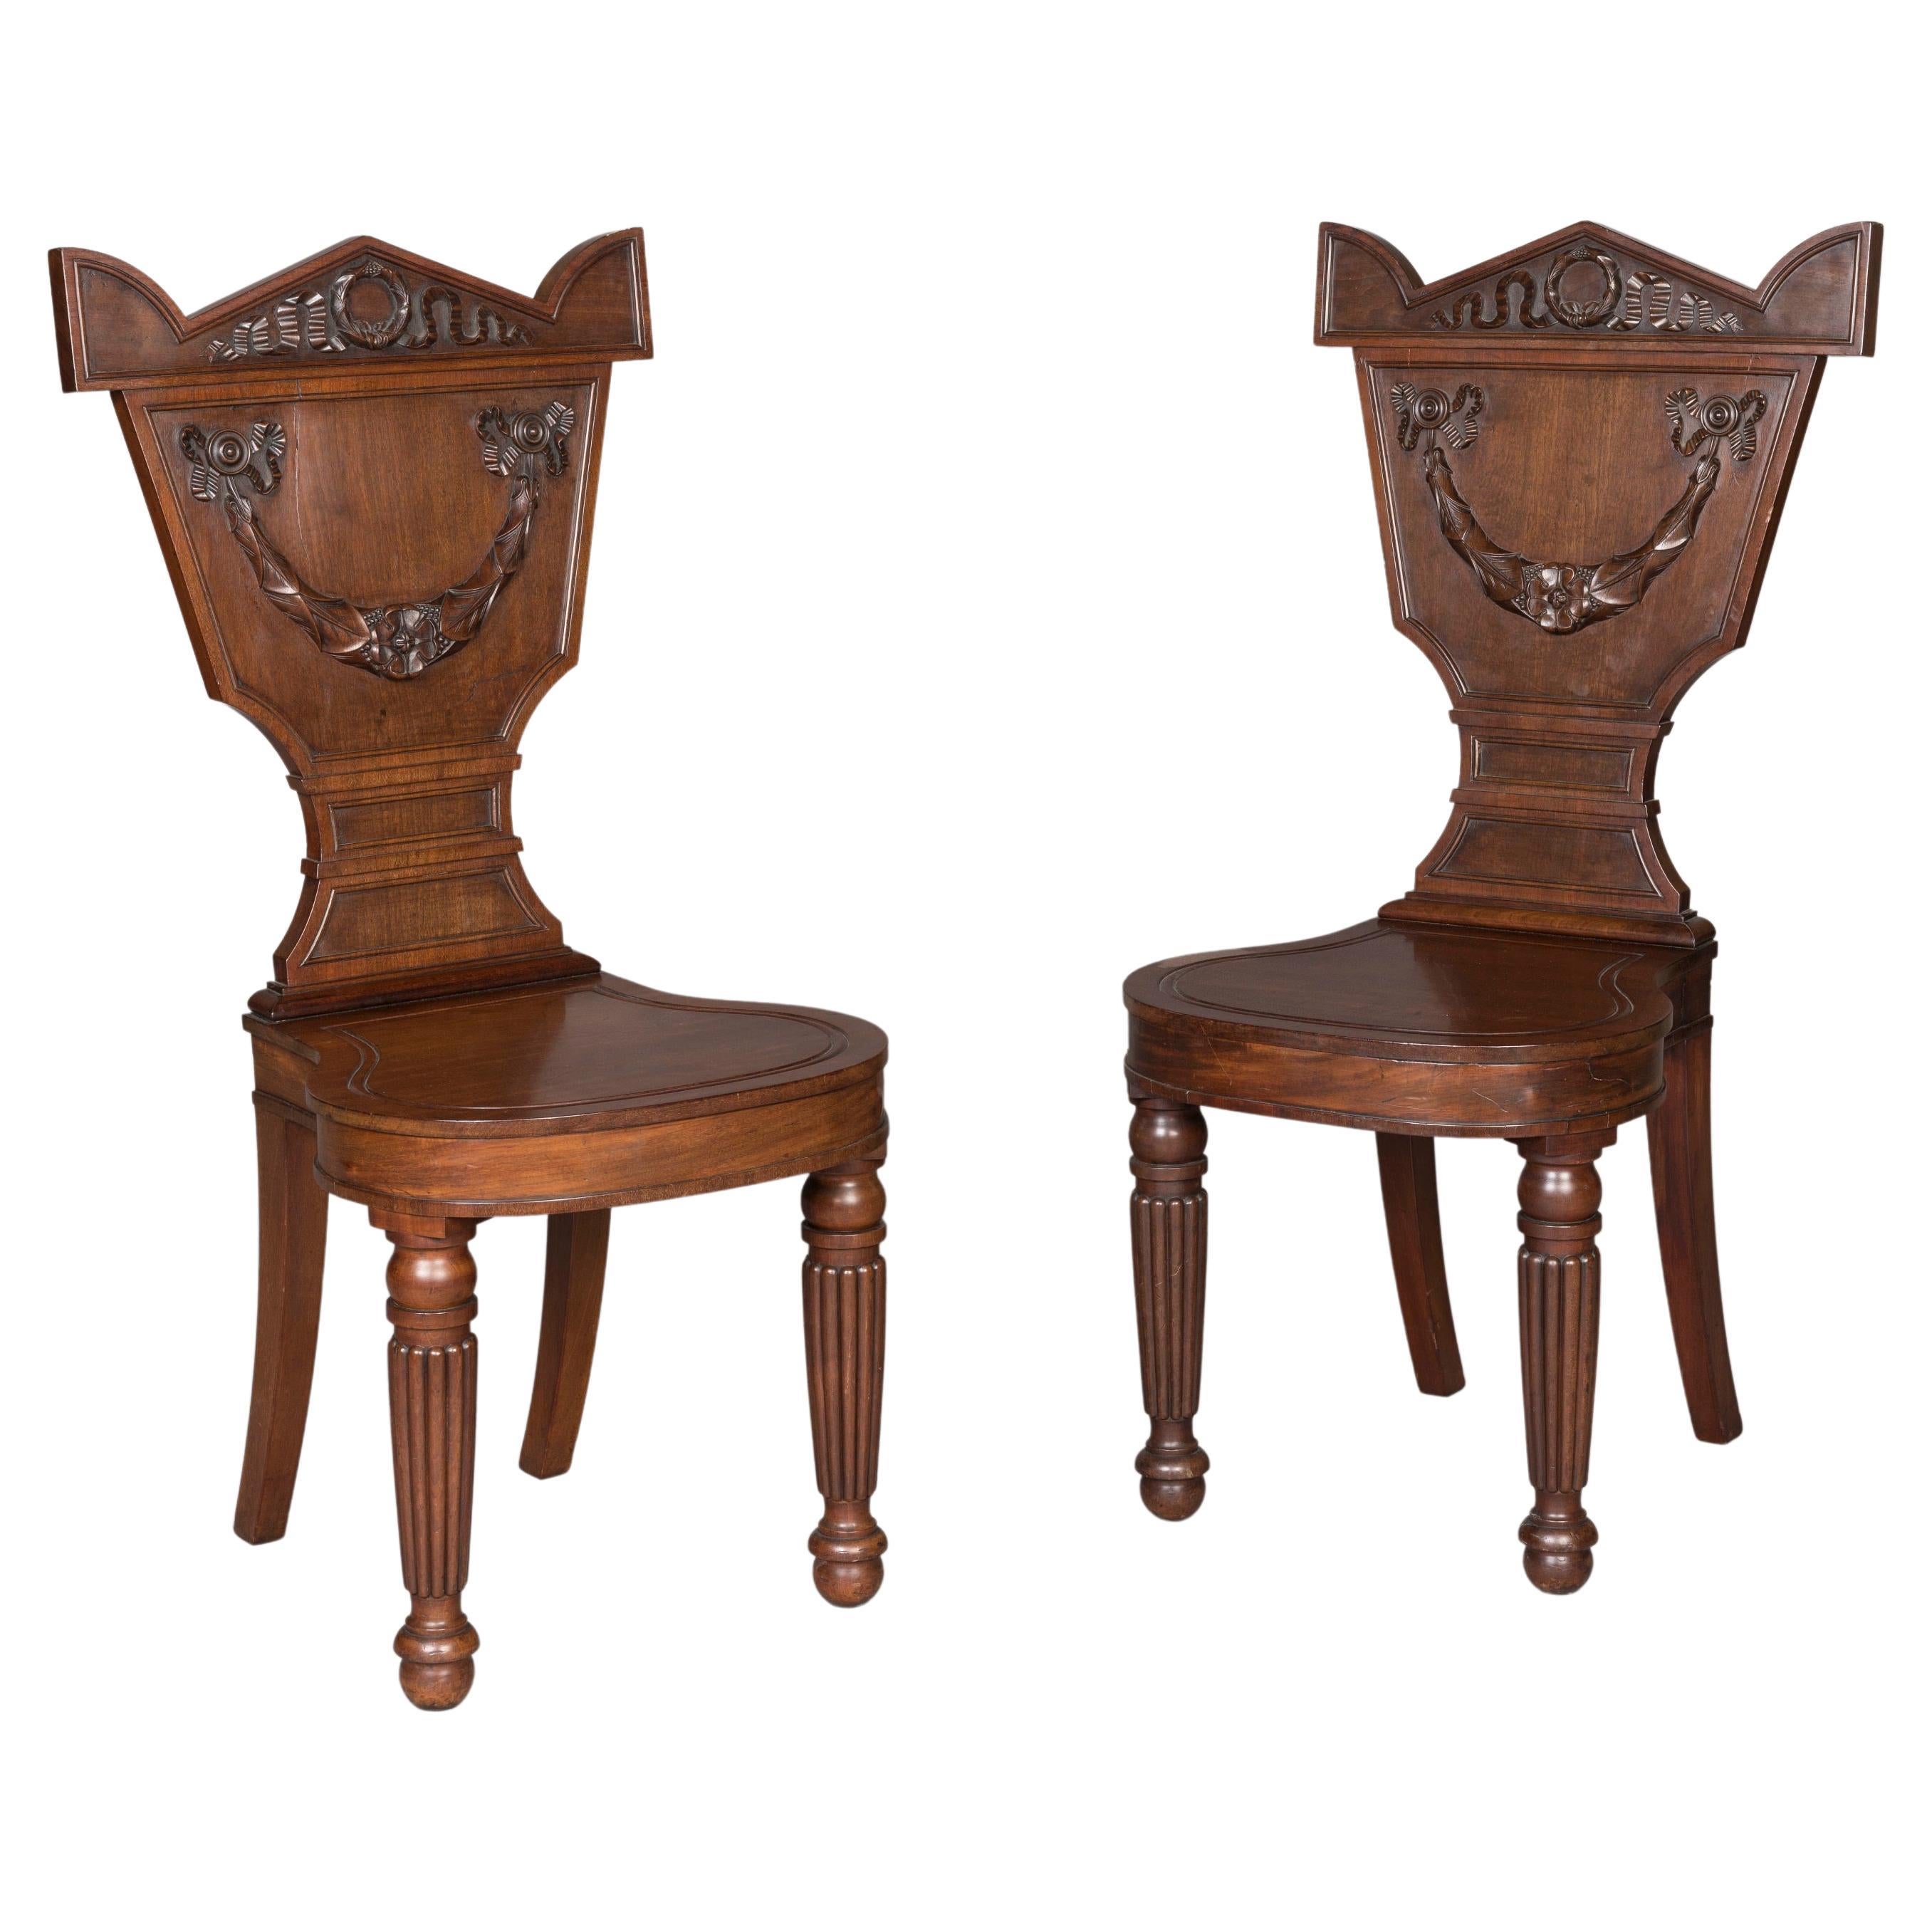 Pair of 19th Century Georgian Period Carved Mahogany Chairs For Sale